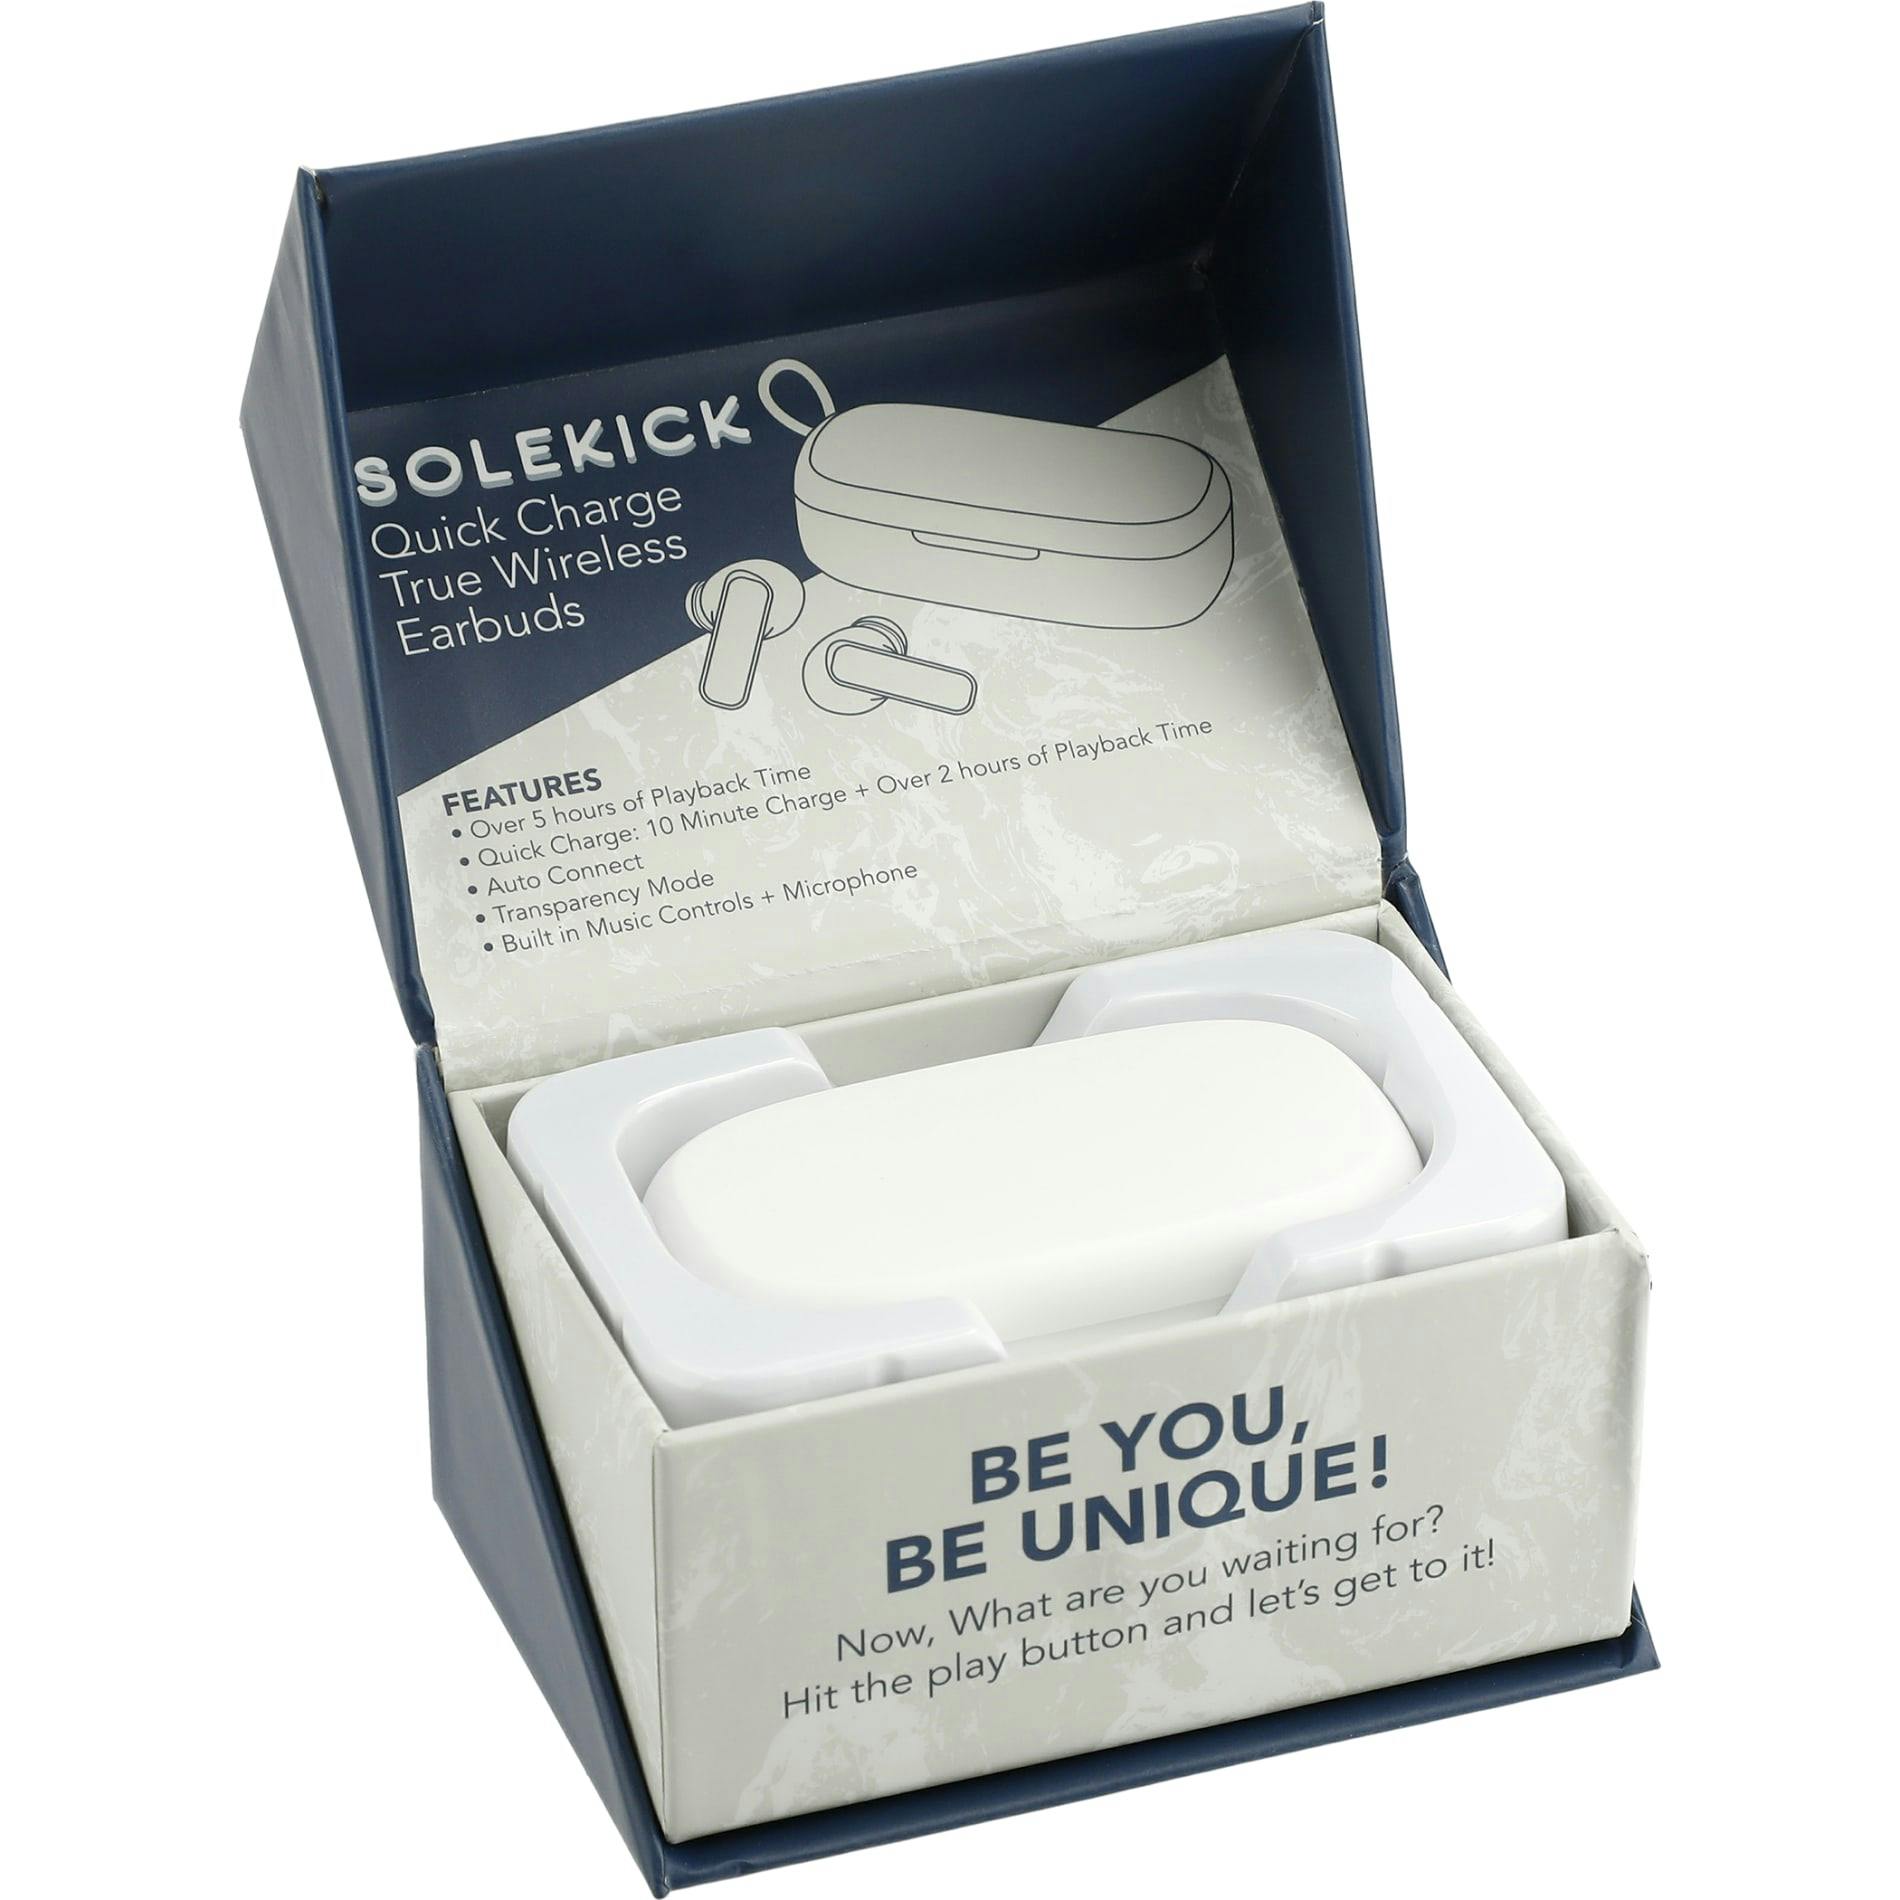 Solekick™ Quick Charge True Wireless Earbuds - additional Image 4